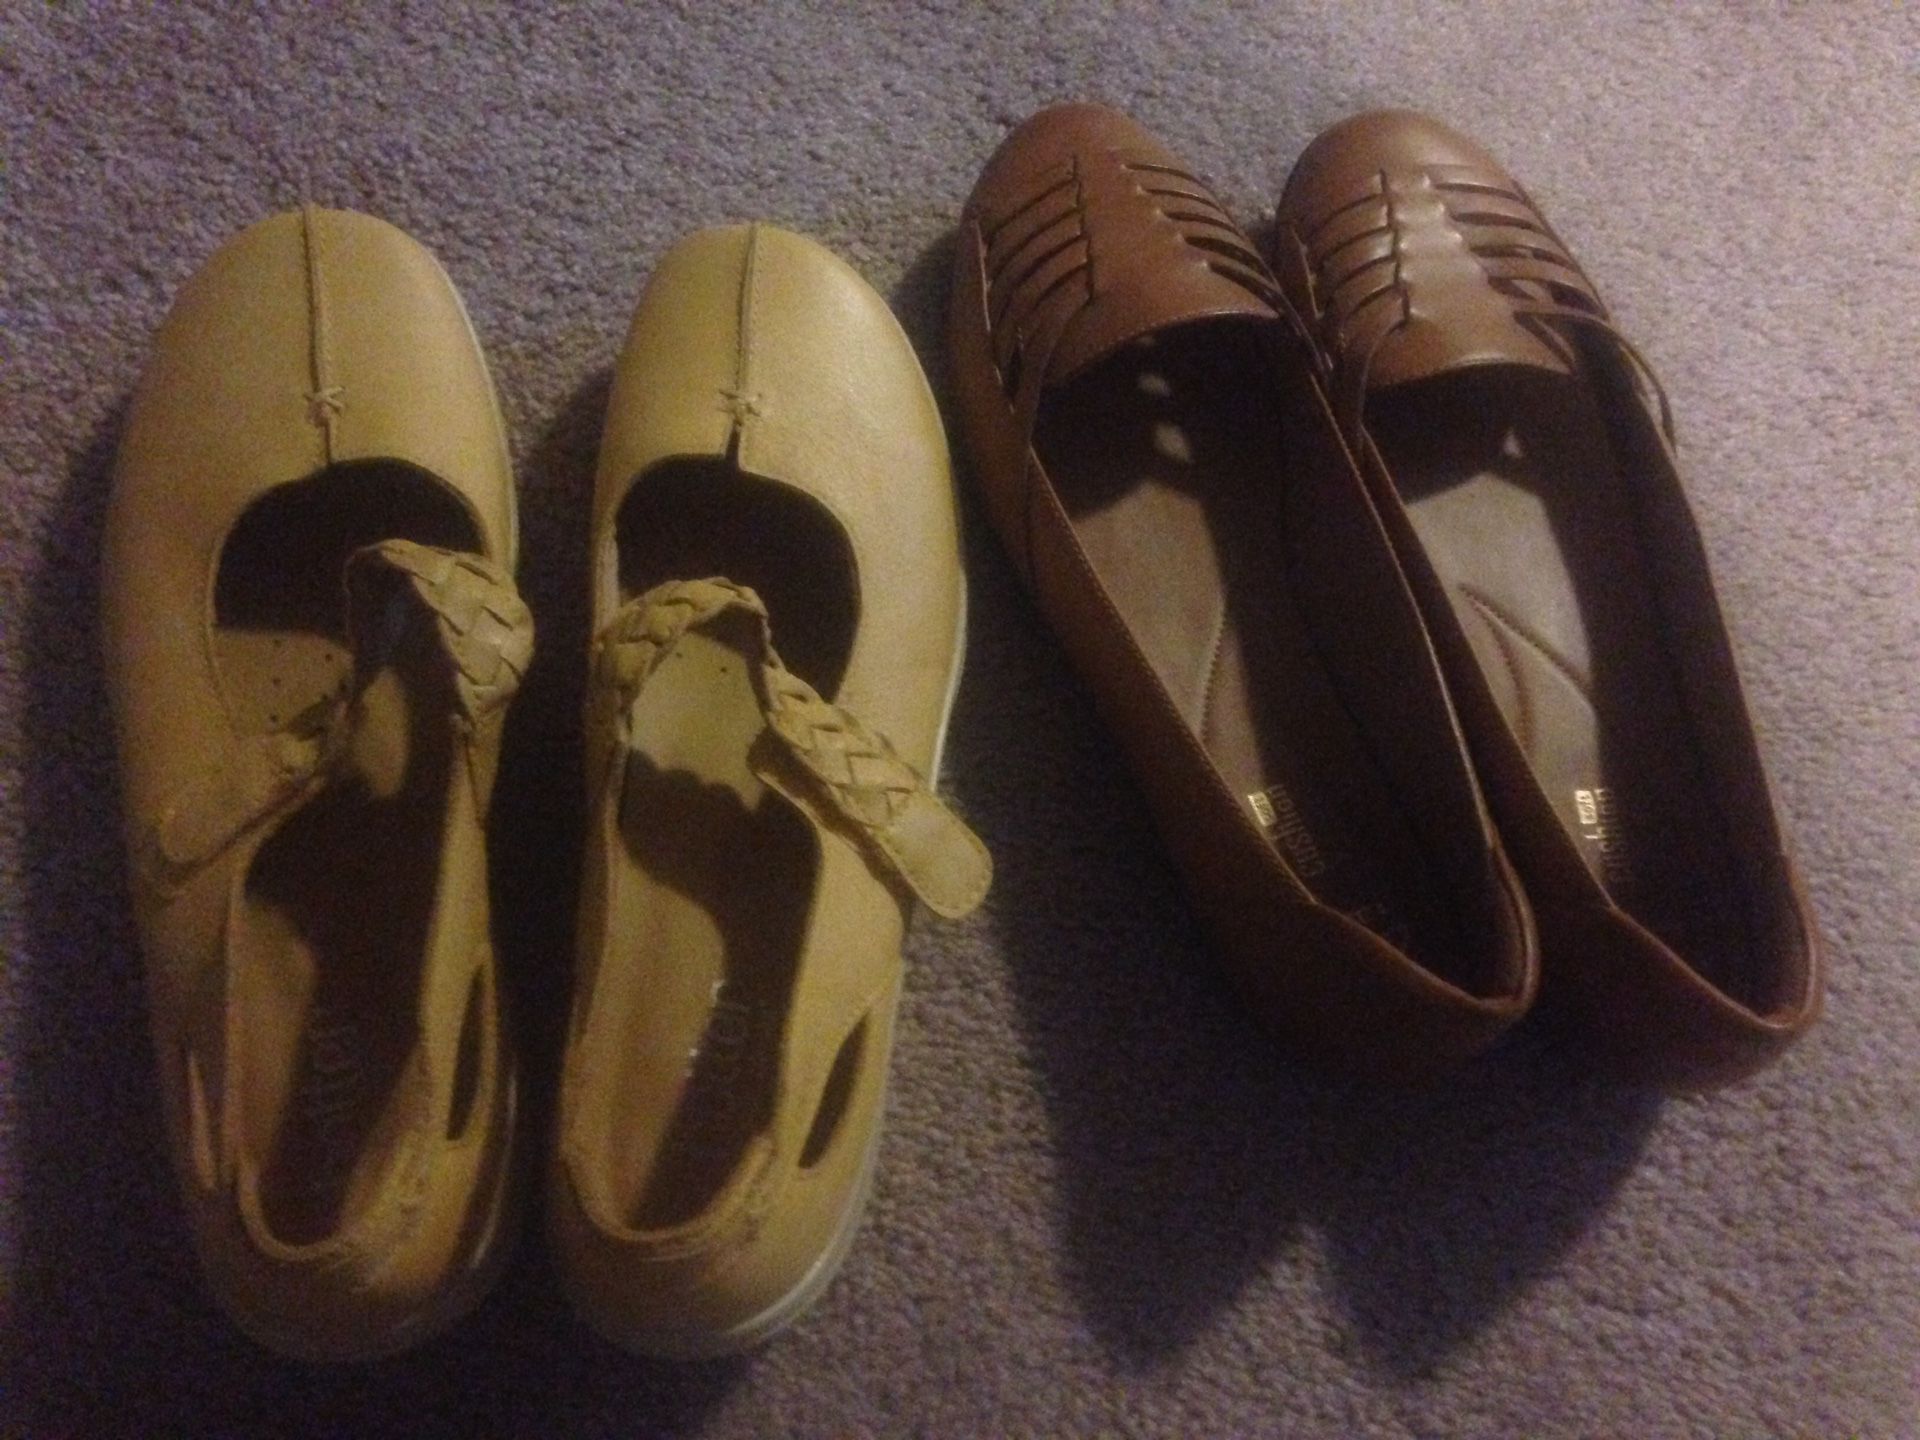 Ladies size 10 leather shoes